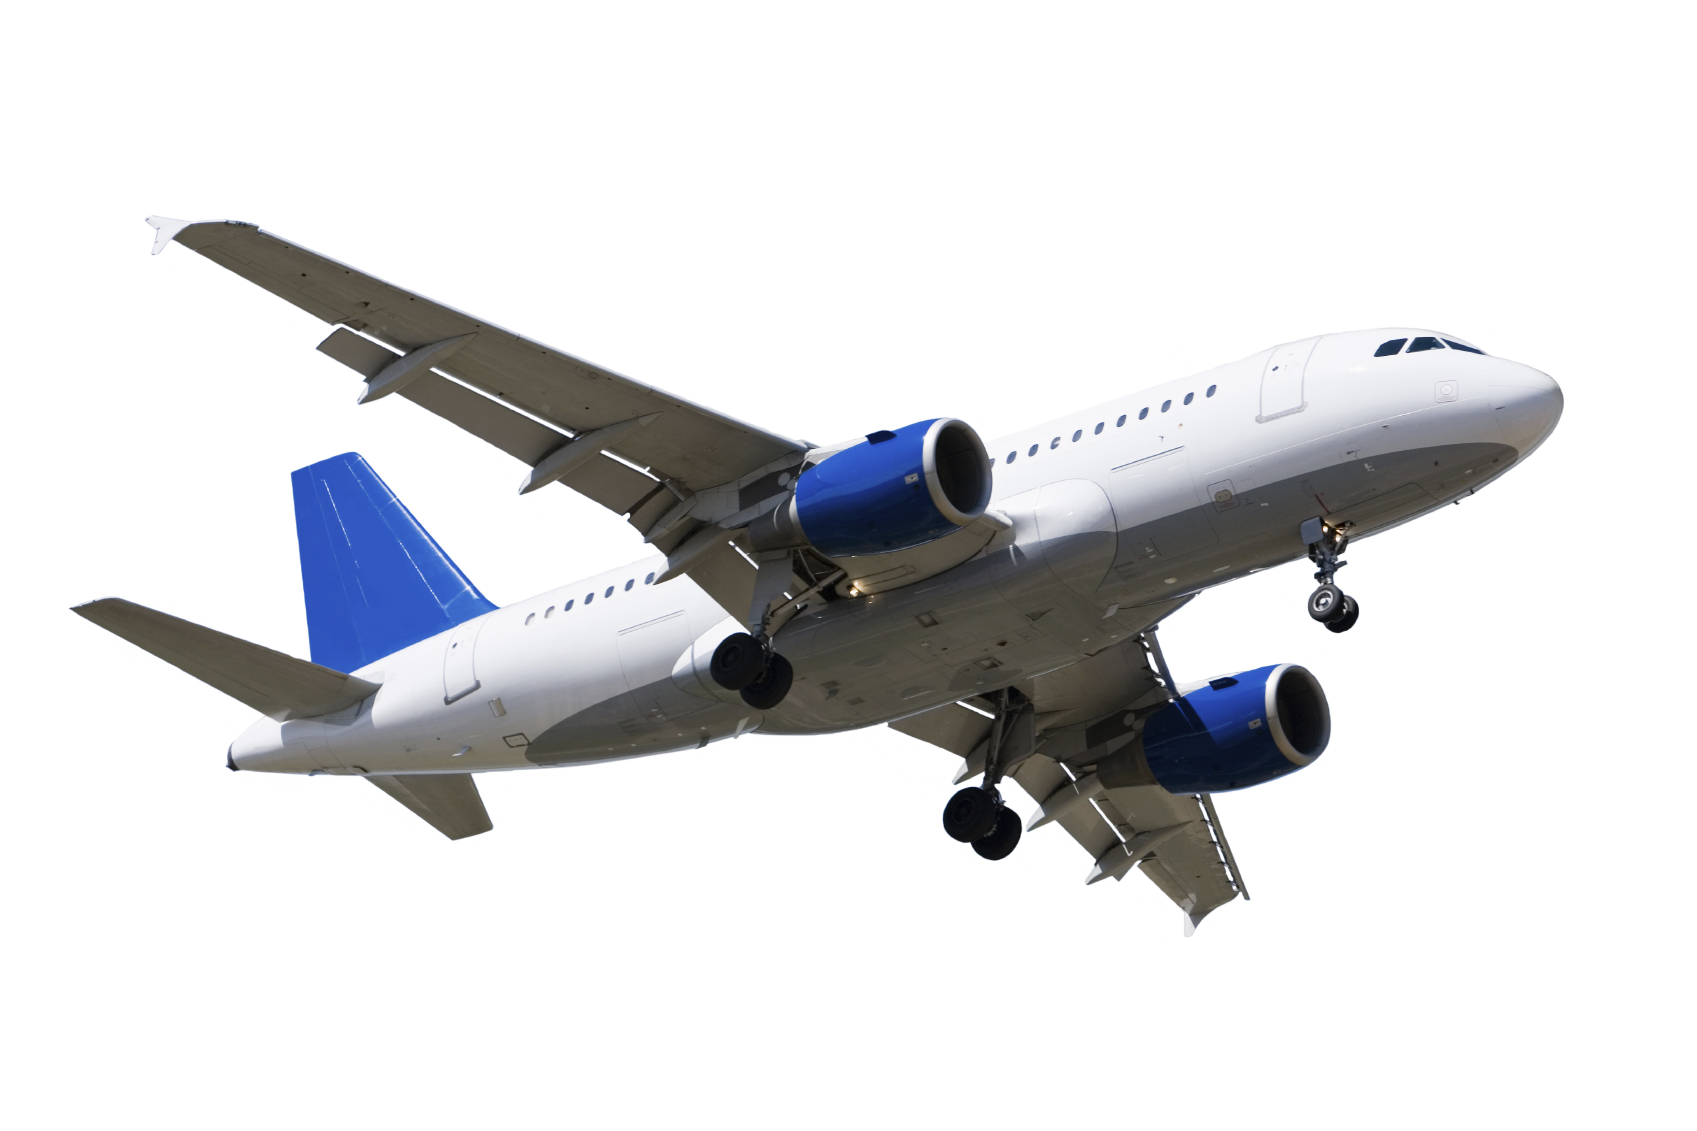 Planes PNG images free download, plane PNG photo